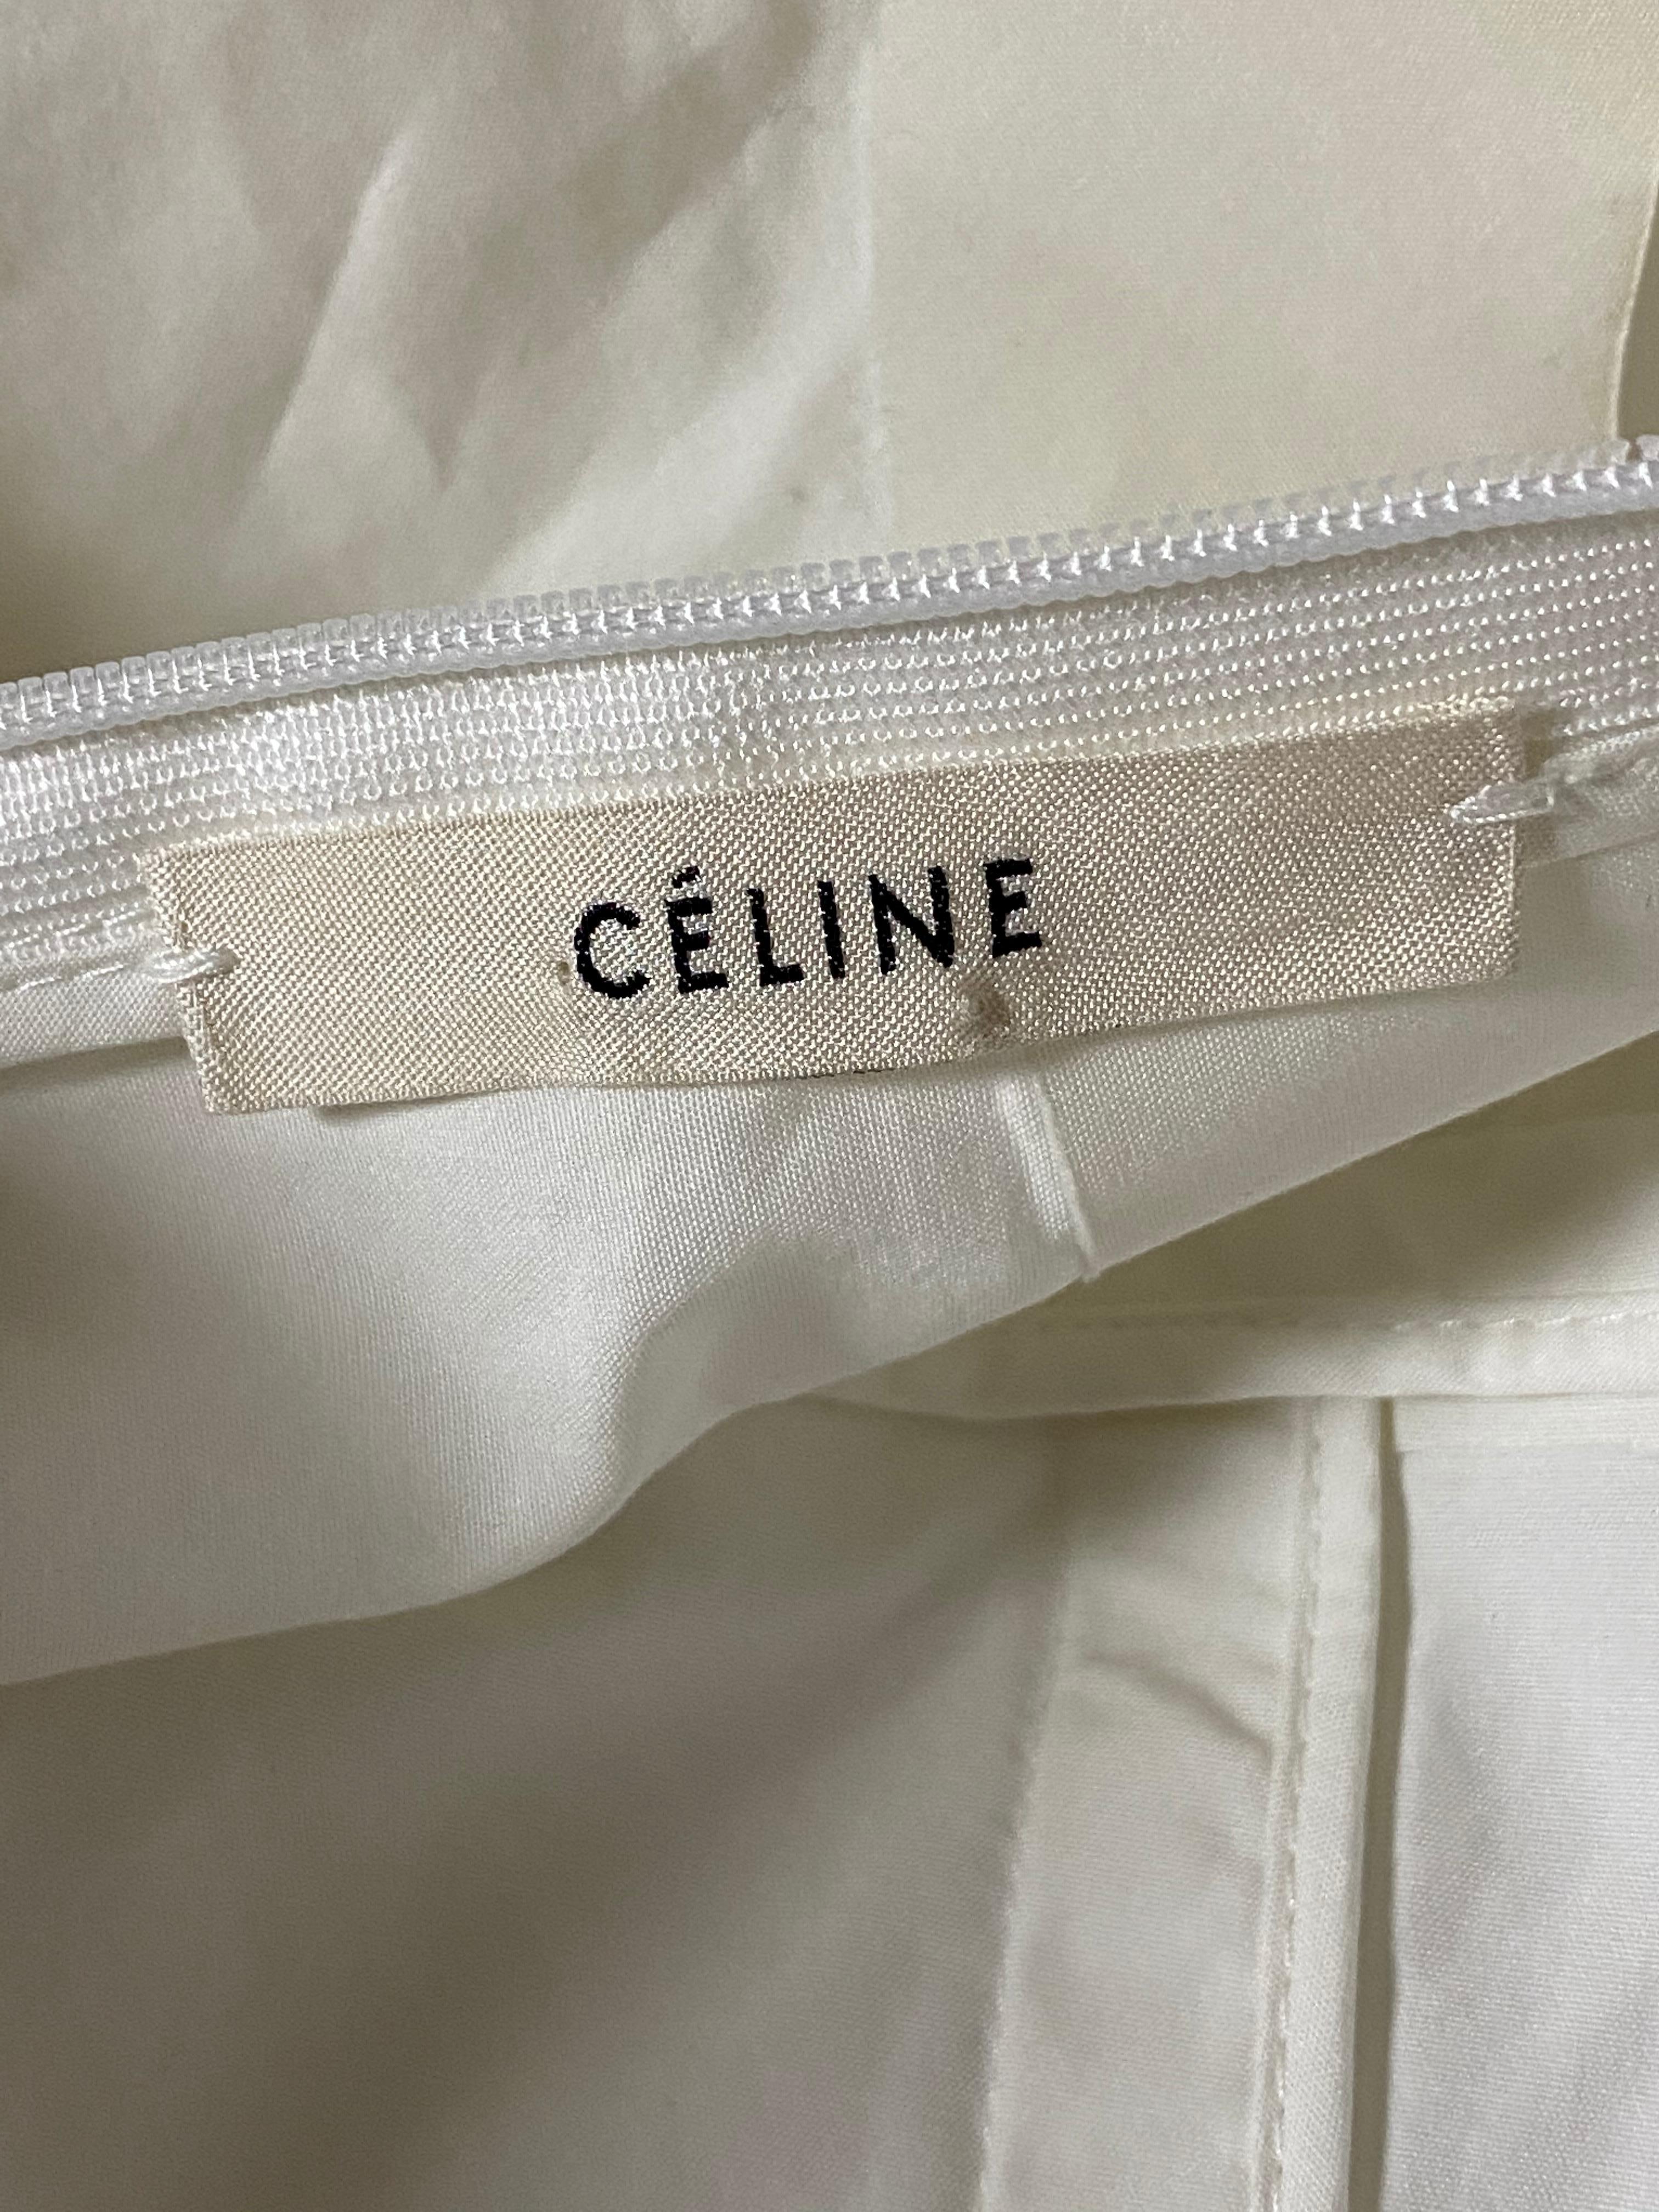 Celine White Cotton Long Sleeves Blouse Top Size 40 For Sale 4